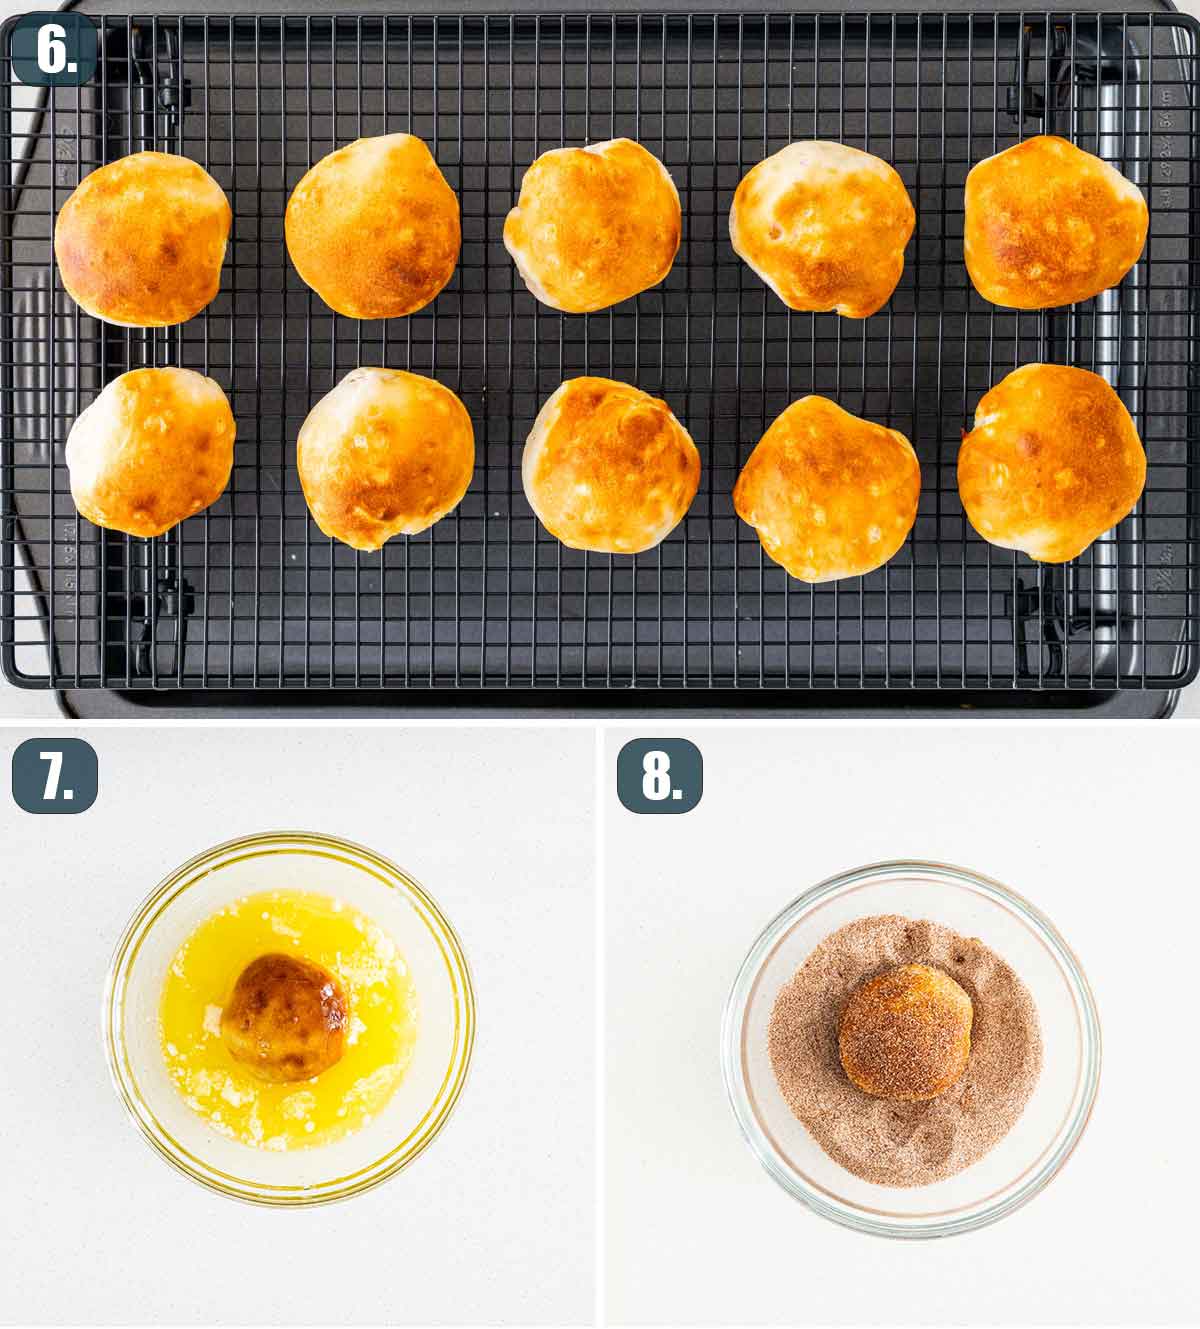 process shots showing how to roll apple pie bombs through butter and cinnamon sugar.